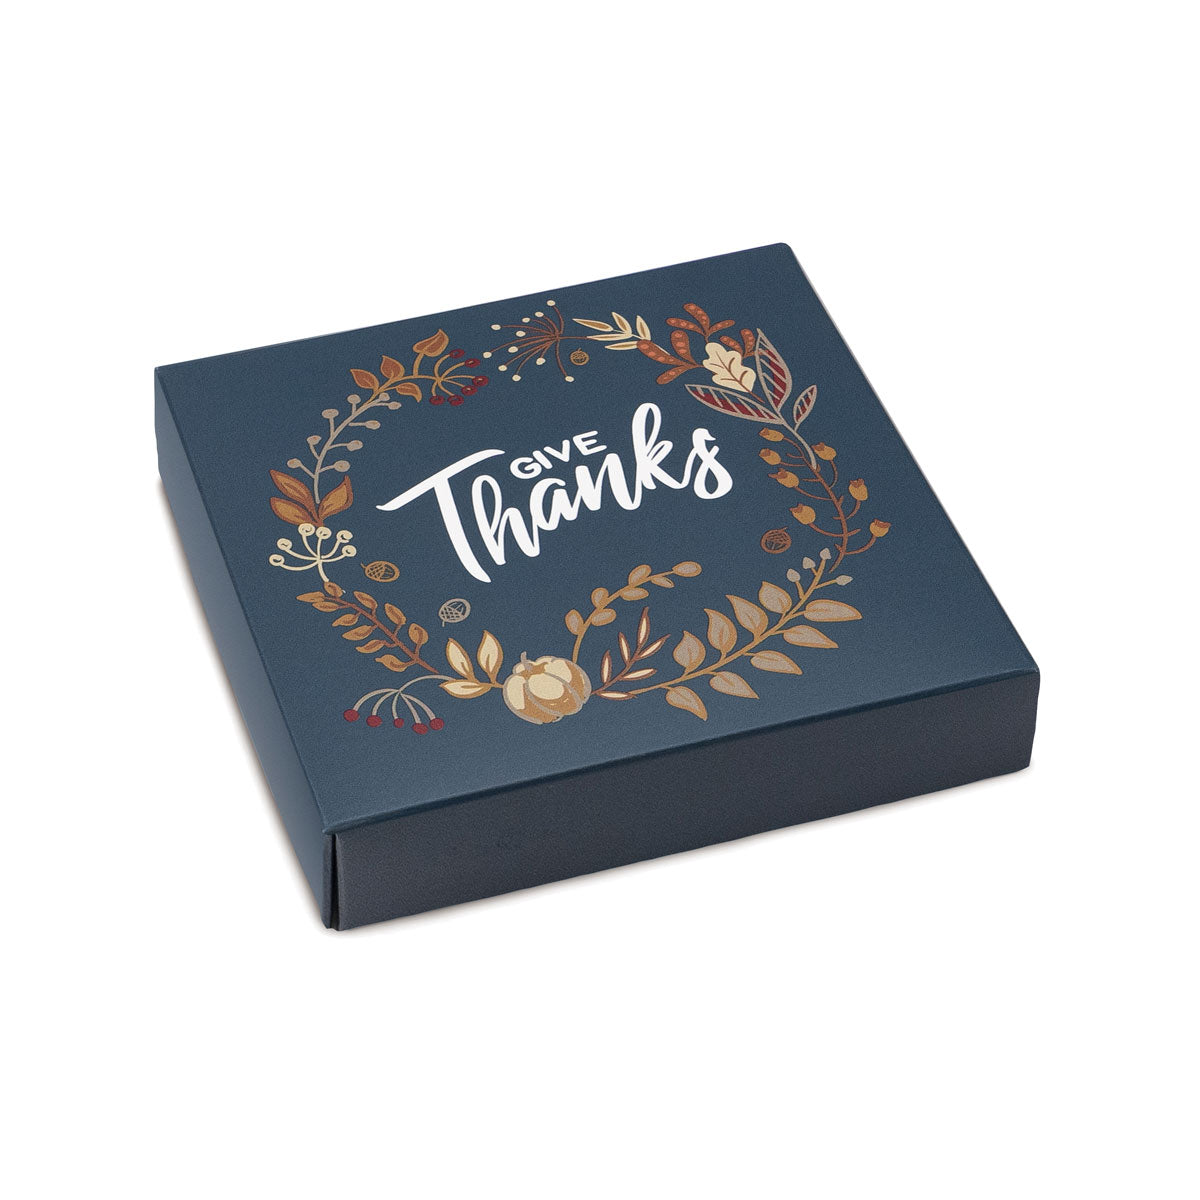 'Give Thanks' Themed Box Cover for 16 Piece Holiday Assortment